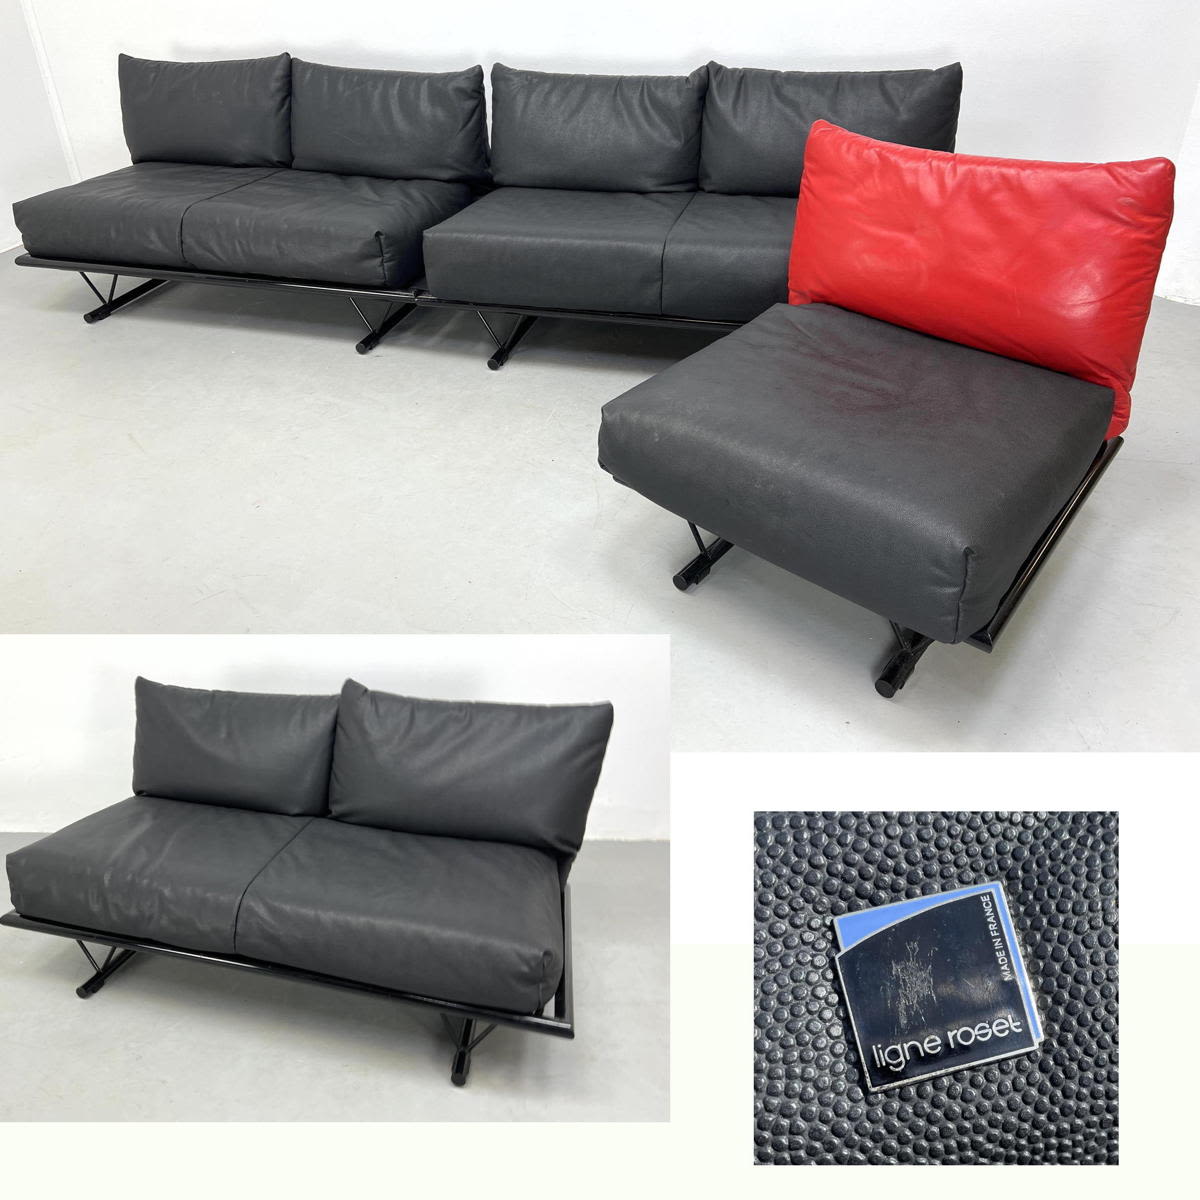 4pcs Black and red vinyl 3 pc couch